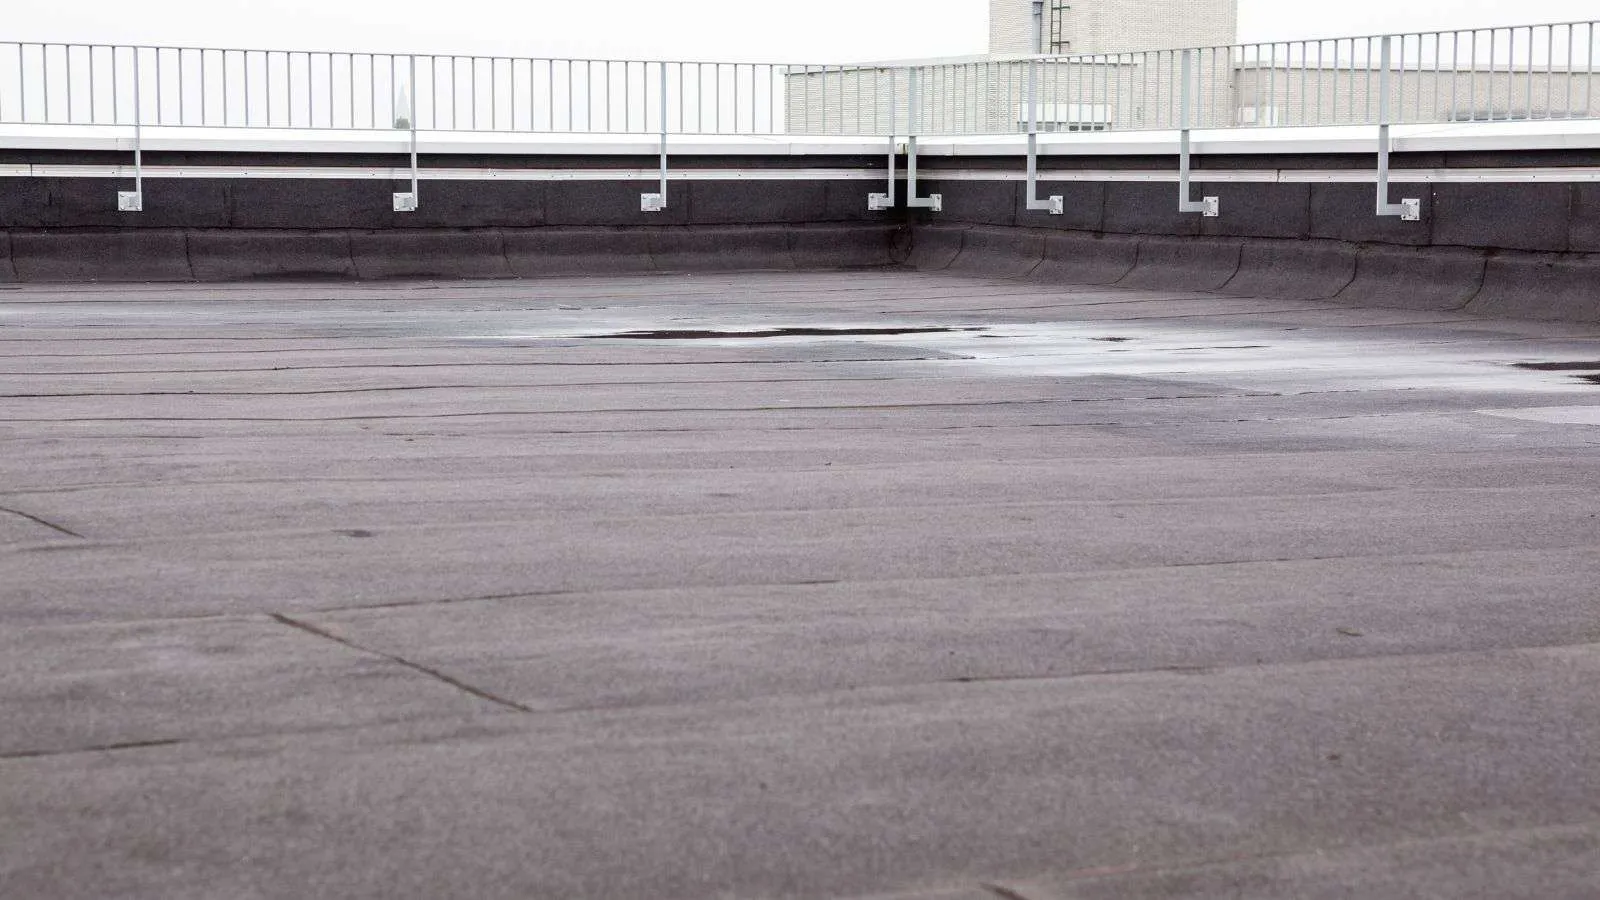 causes of flat roof failures due to rain load - bighomeprojects.com